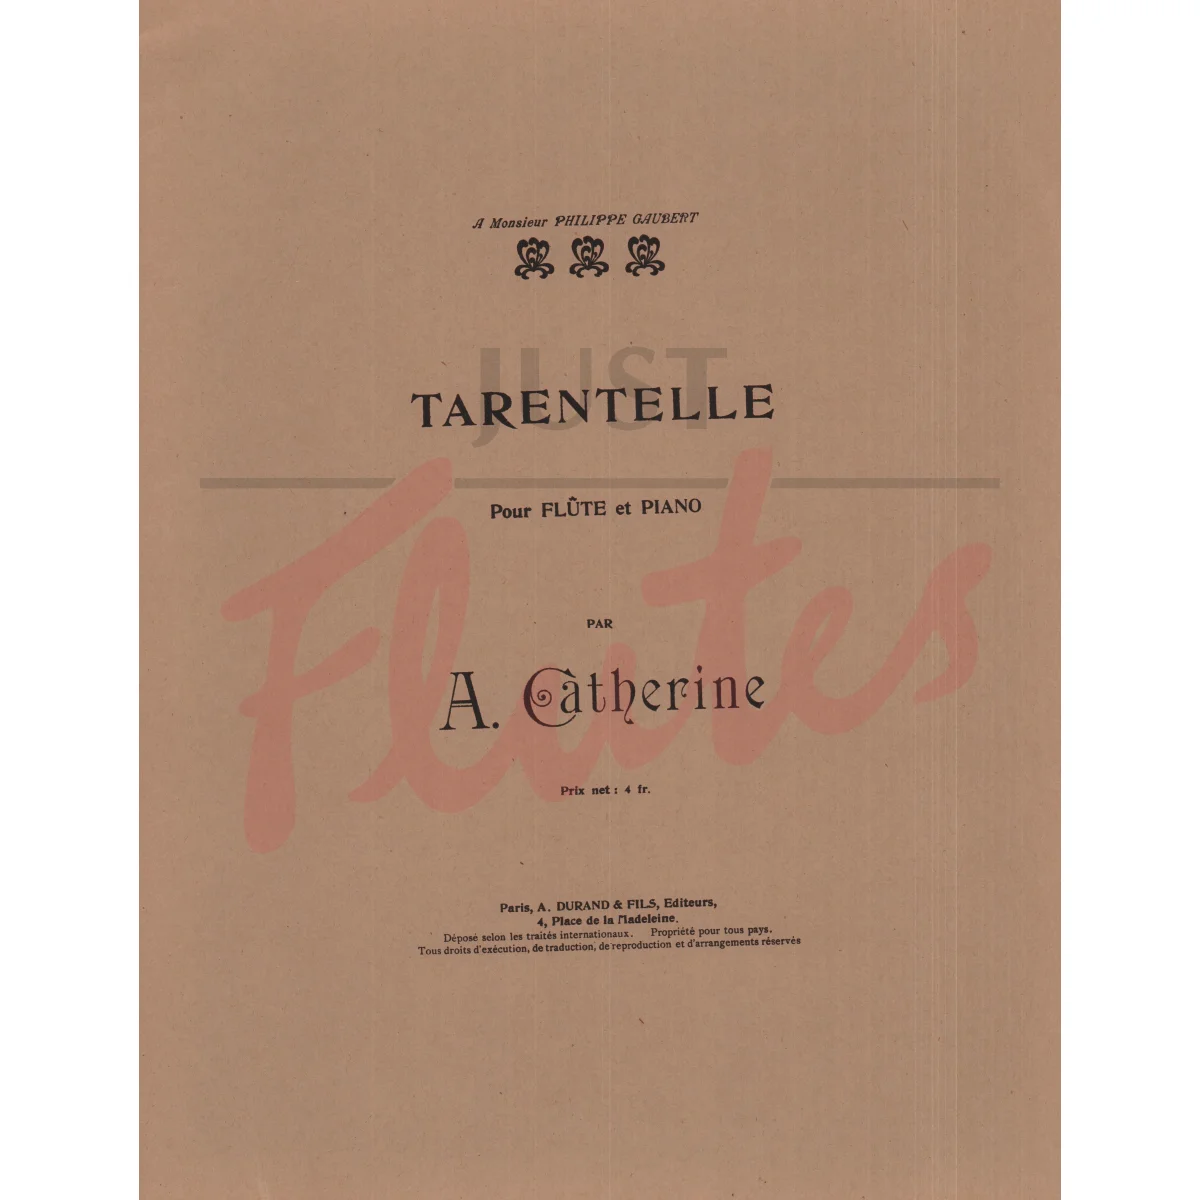 Tarentelle for Flute and Piano